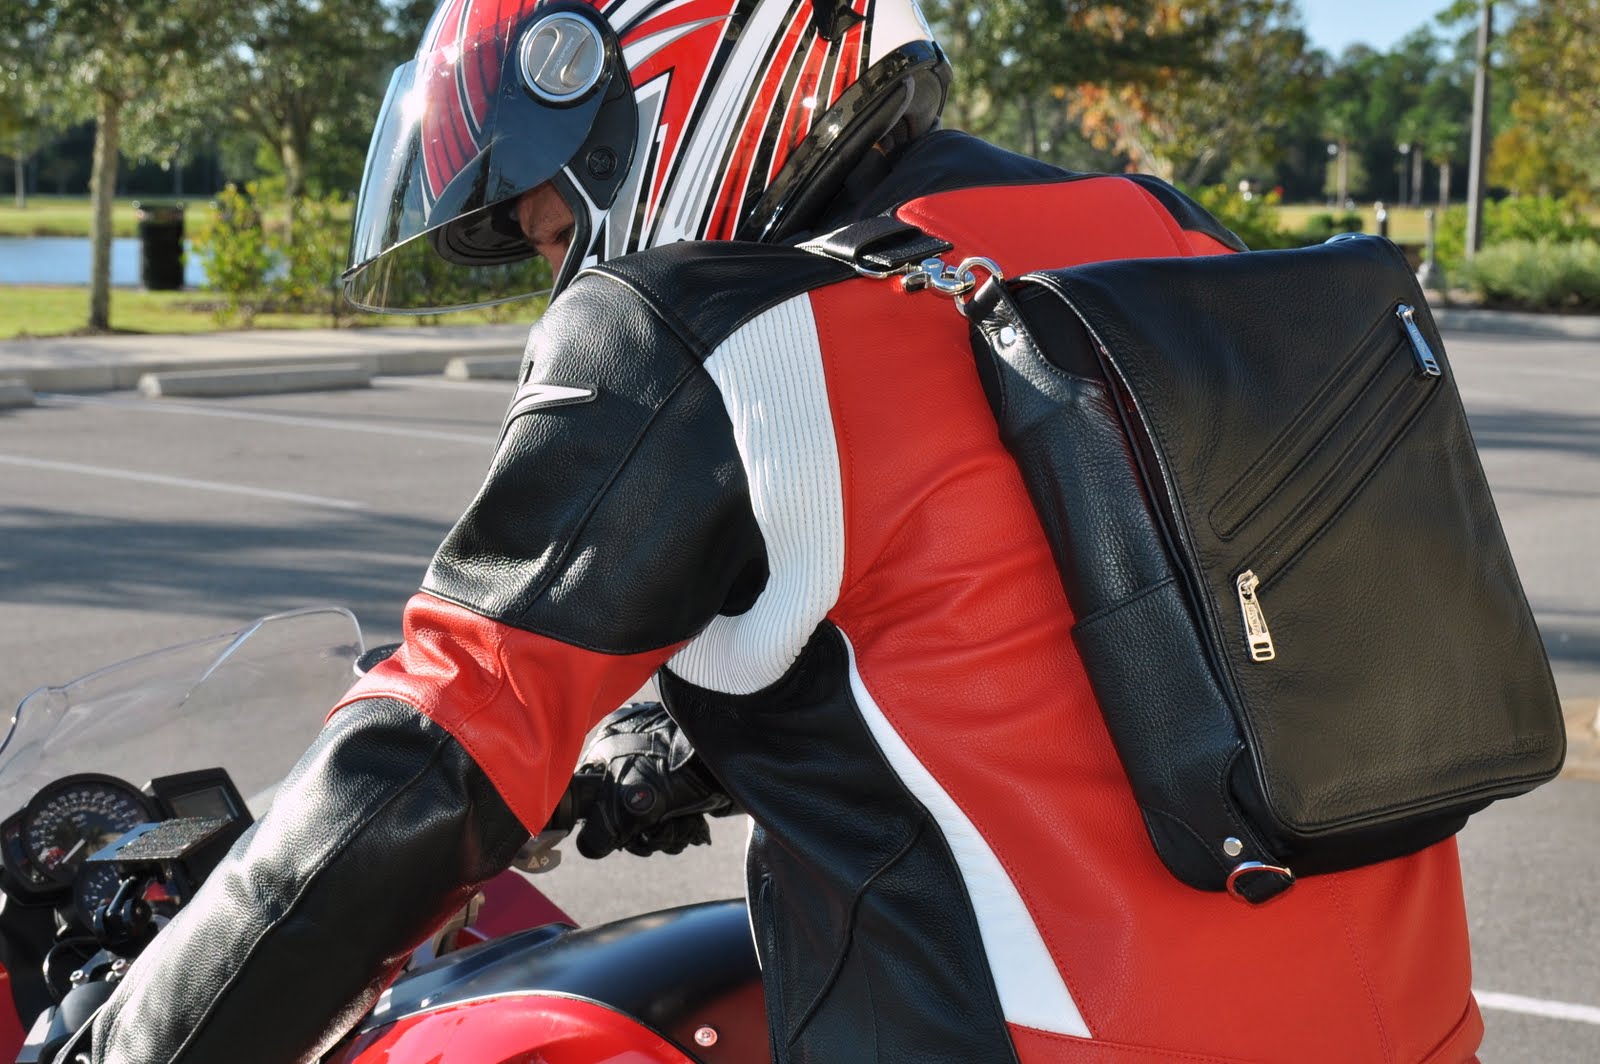 iPad messenger bag converts to backpack when riding a motorcycle